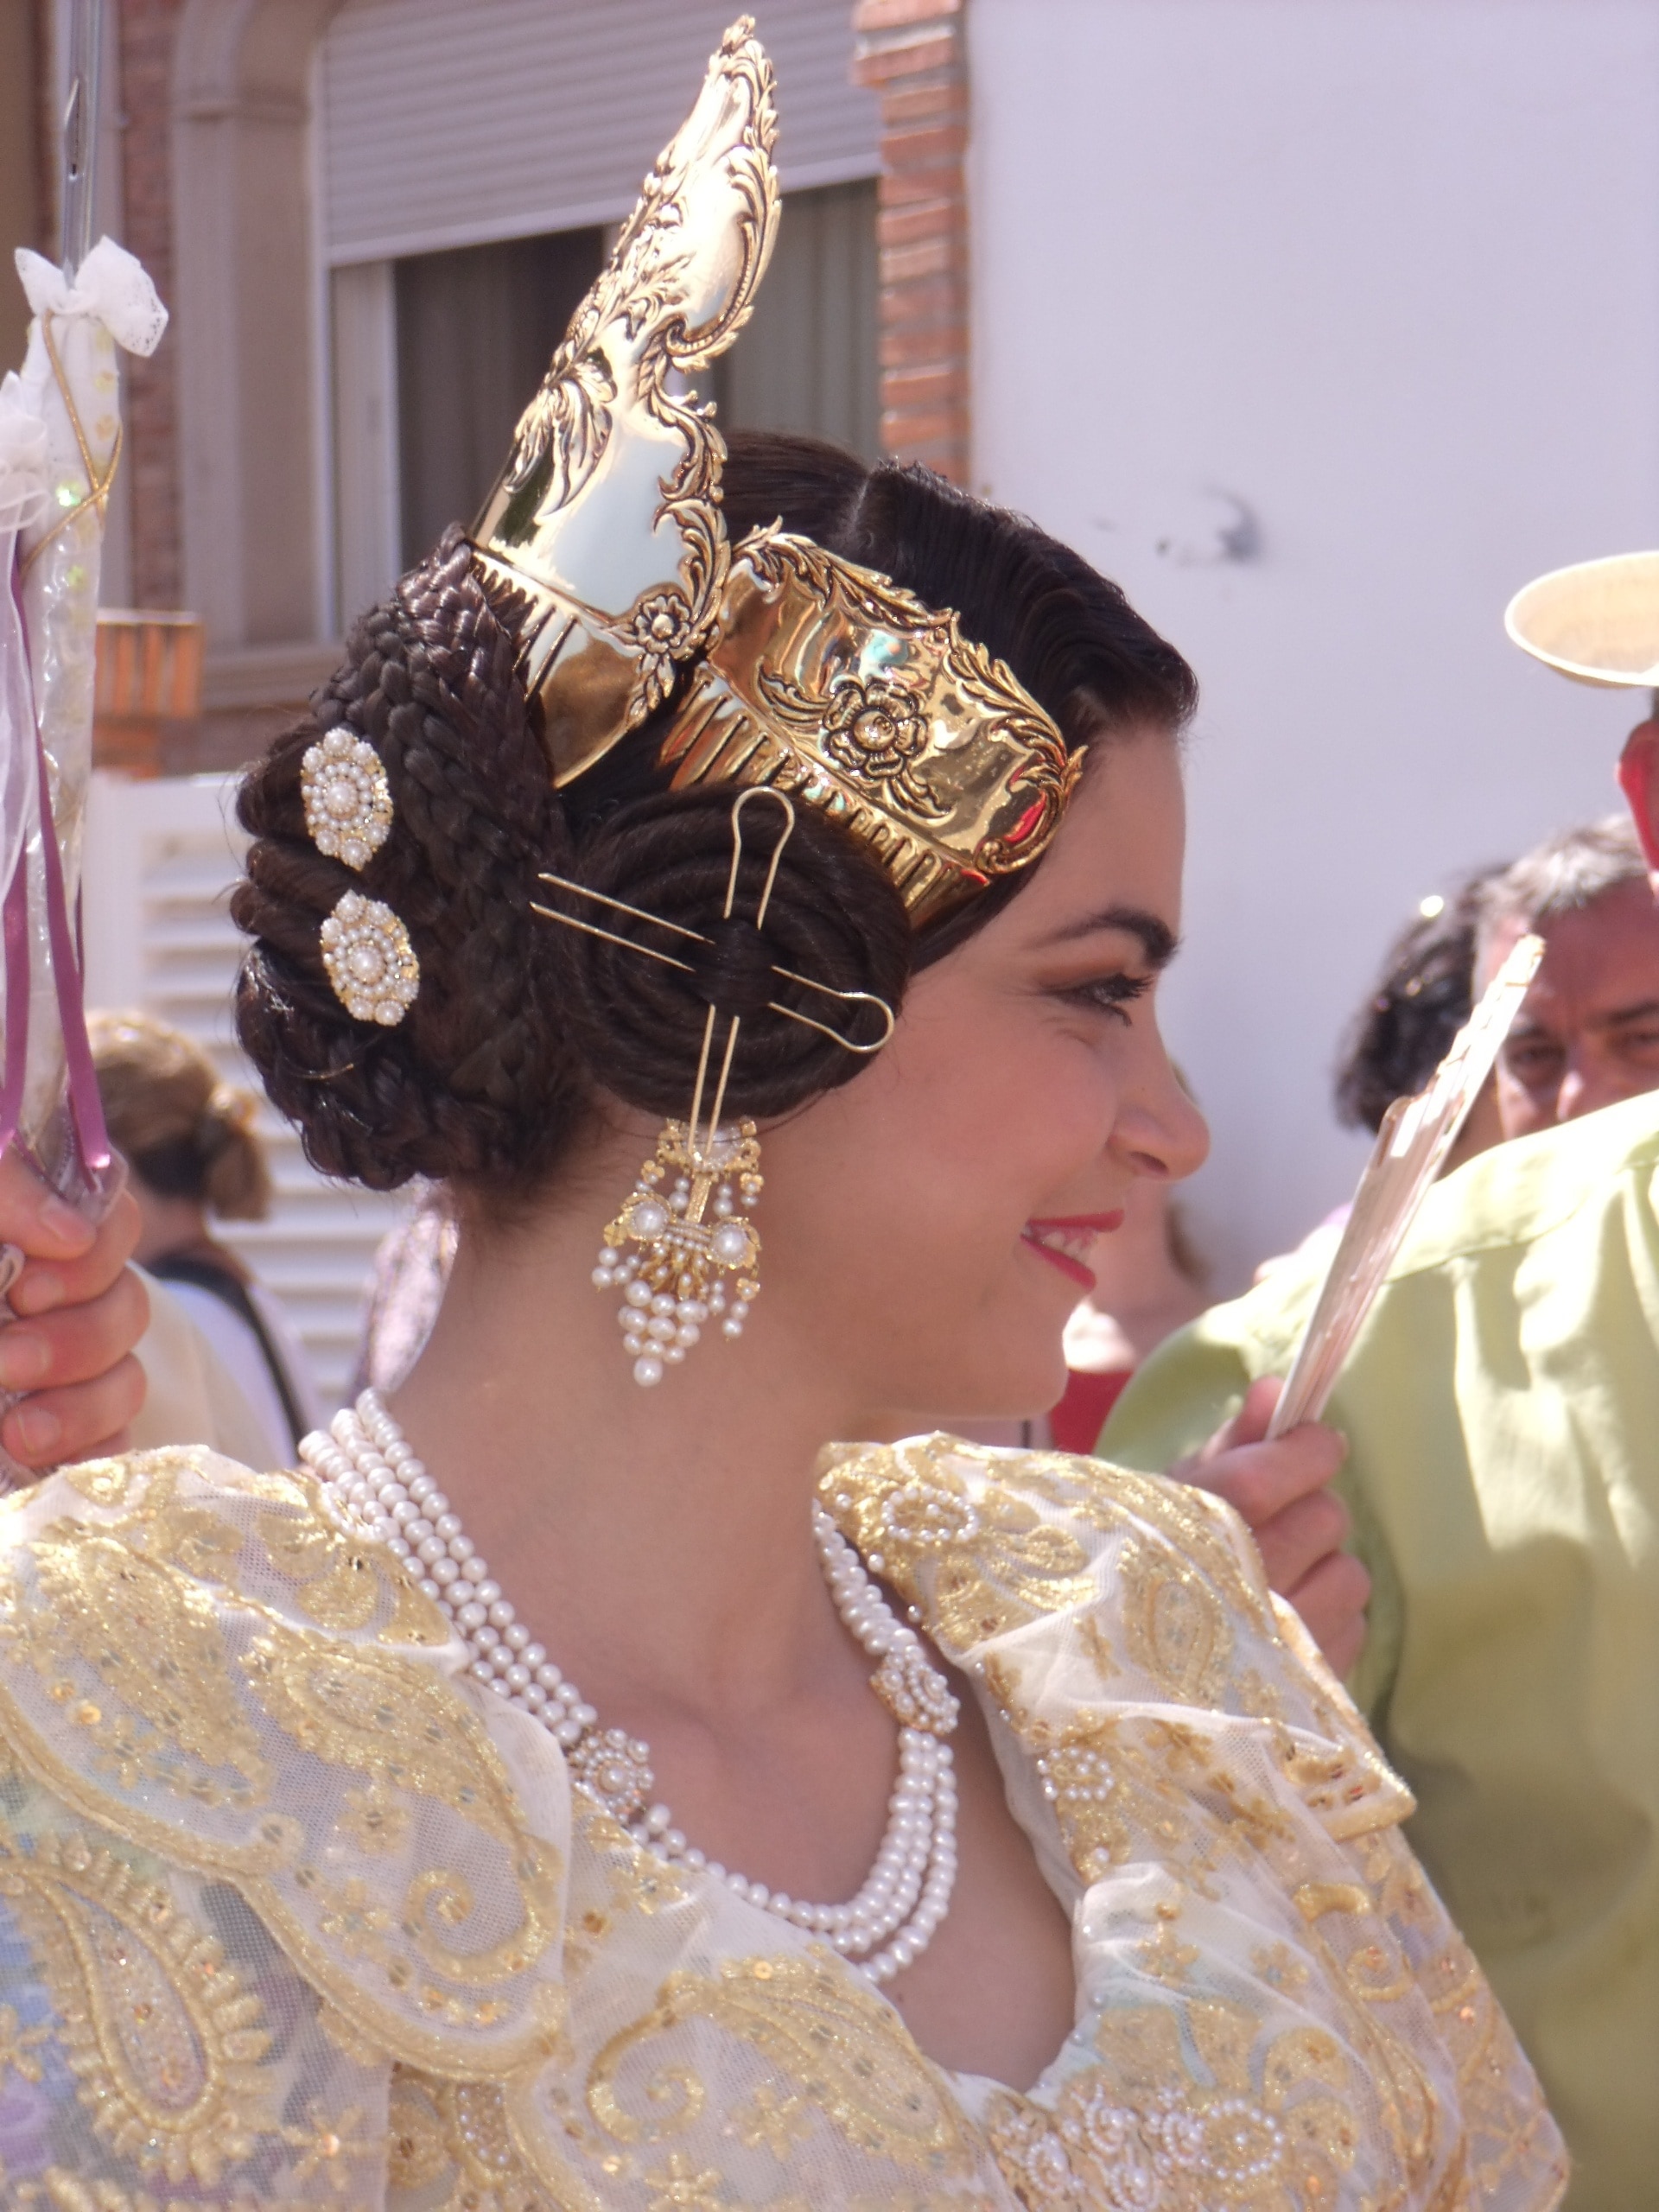 women's wearing gold crown and white necklace during day time